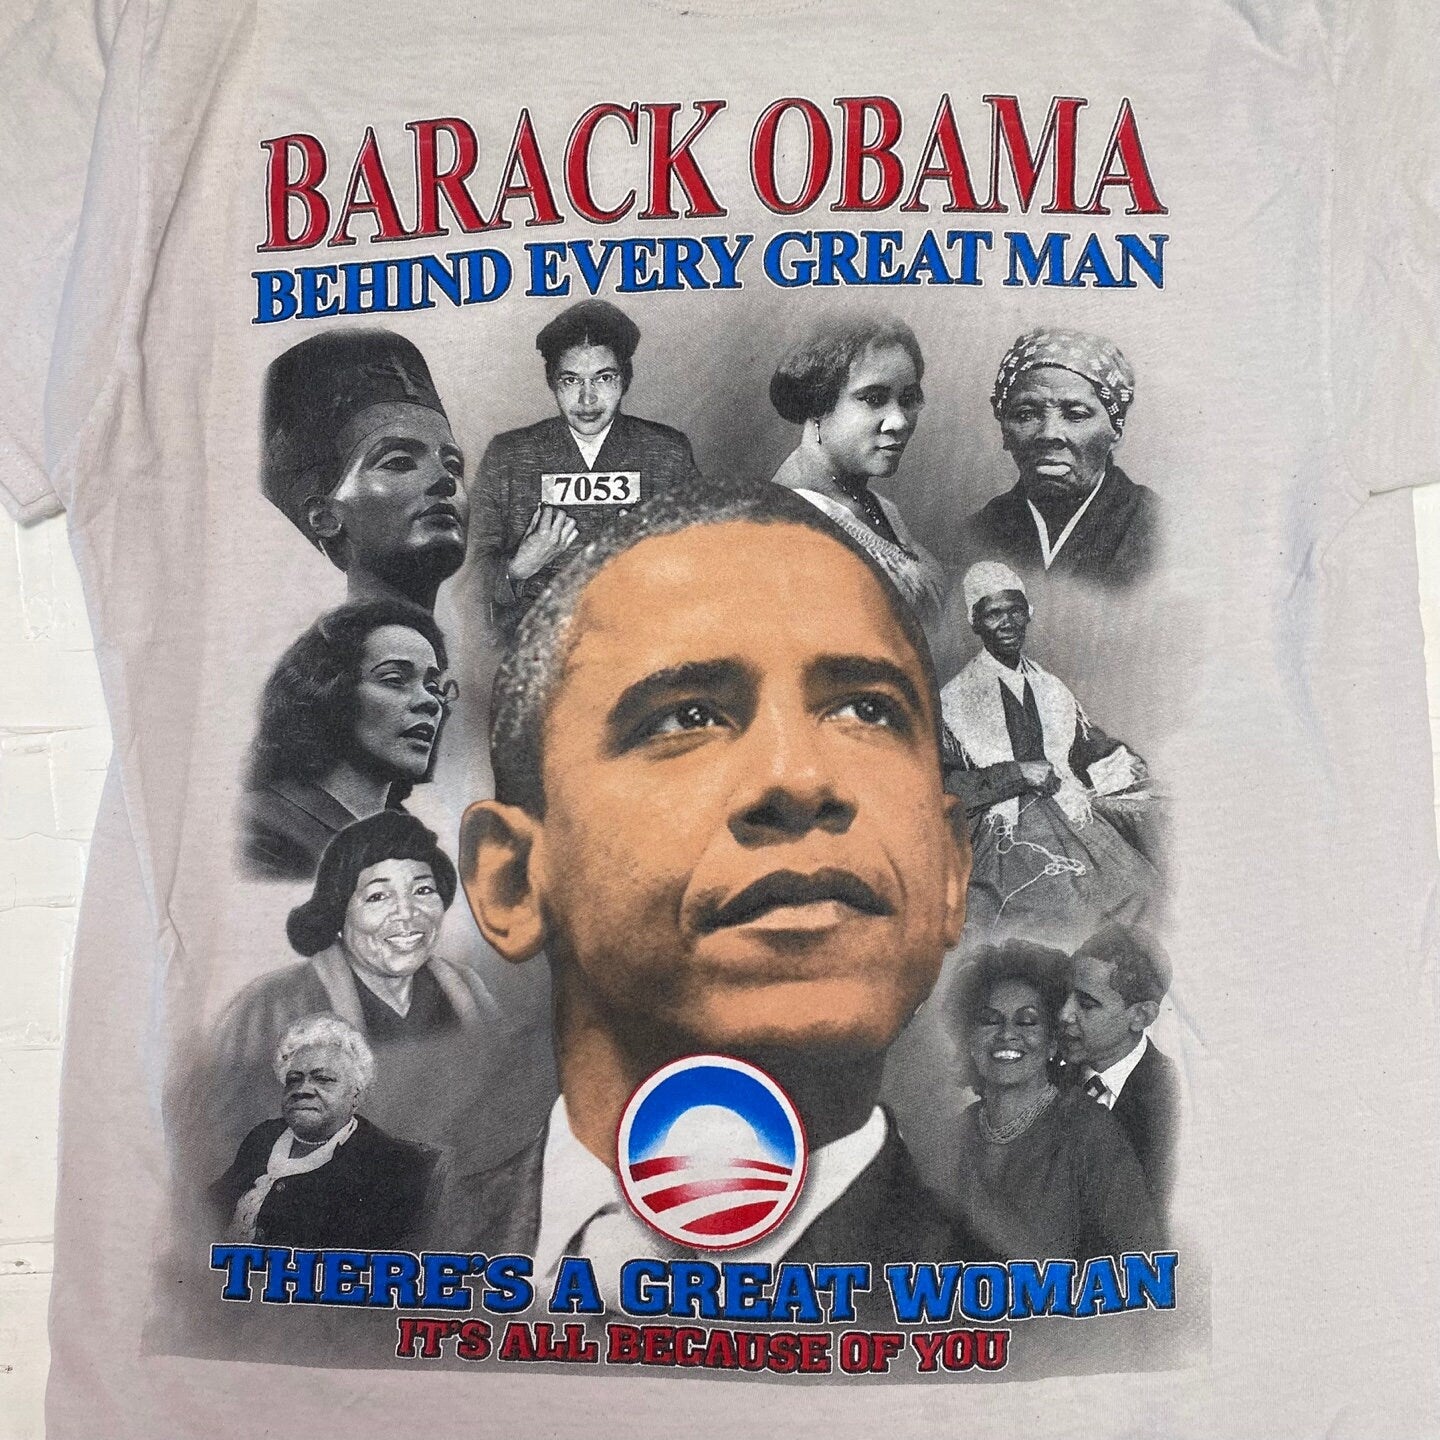 Barack Obama "Behind Every Great Man There is a Great Woman It's All Because of You" T-Shirt | Graphic T-Shirt | Size L | SKU M-2077 |